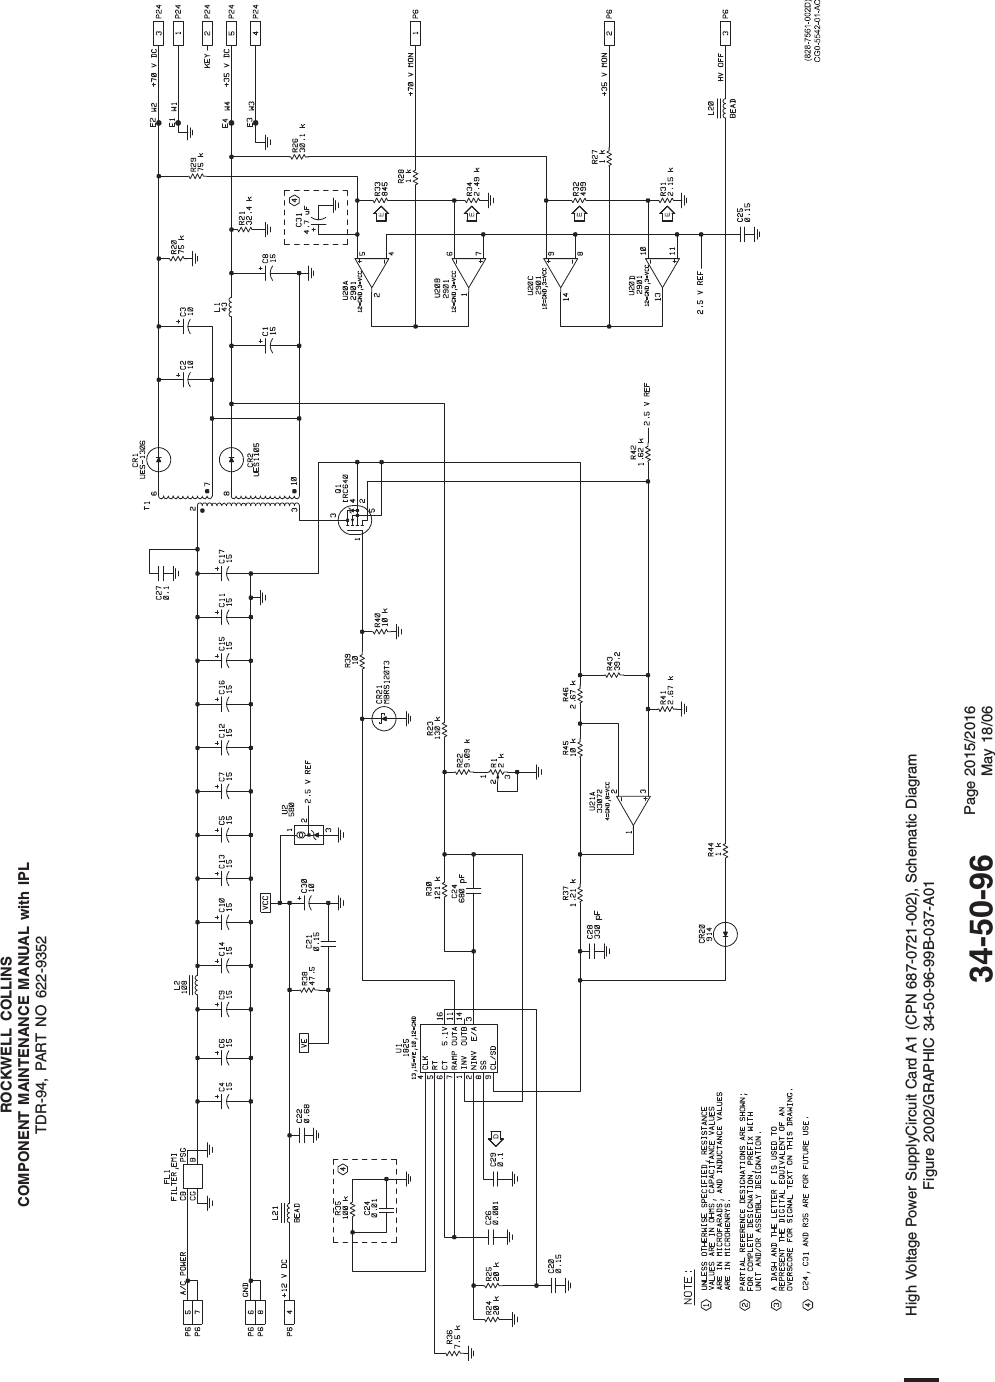 ROCKWELL COLLINSCOMPONENT MAINTENANCE MANUAL with IPLTDR-94, PART NO 622-9352High Voltage Power SupplyCircuit Card A1 (CPN 687-0721-002), Schematic DiagramFigure 2002/GRAPHIC 34-50-96-99B-037-A0134-50-96 Page 2015/2016May 18/06